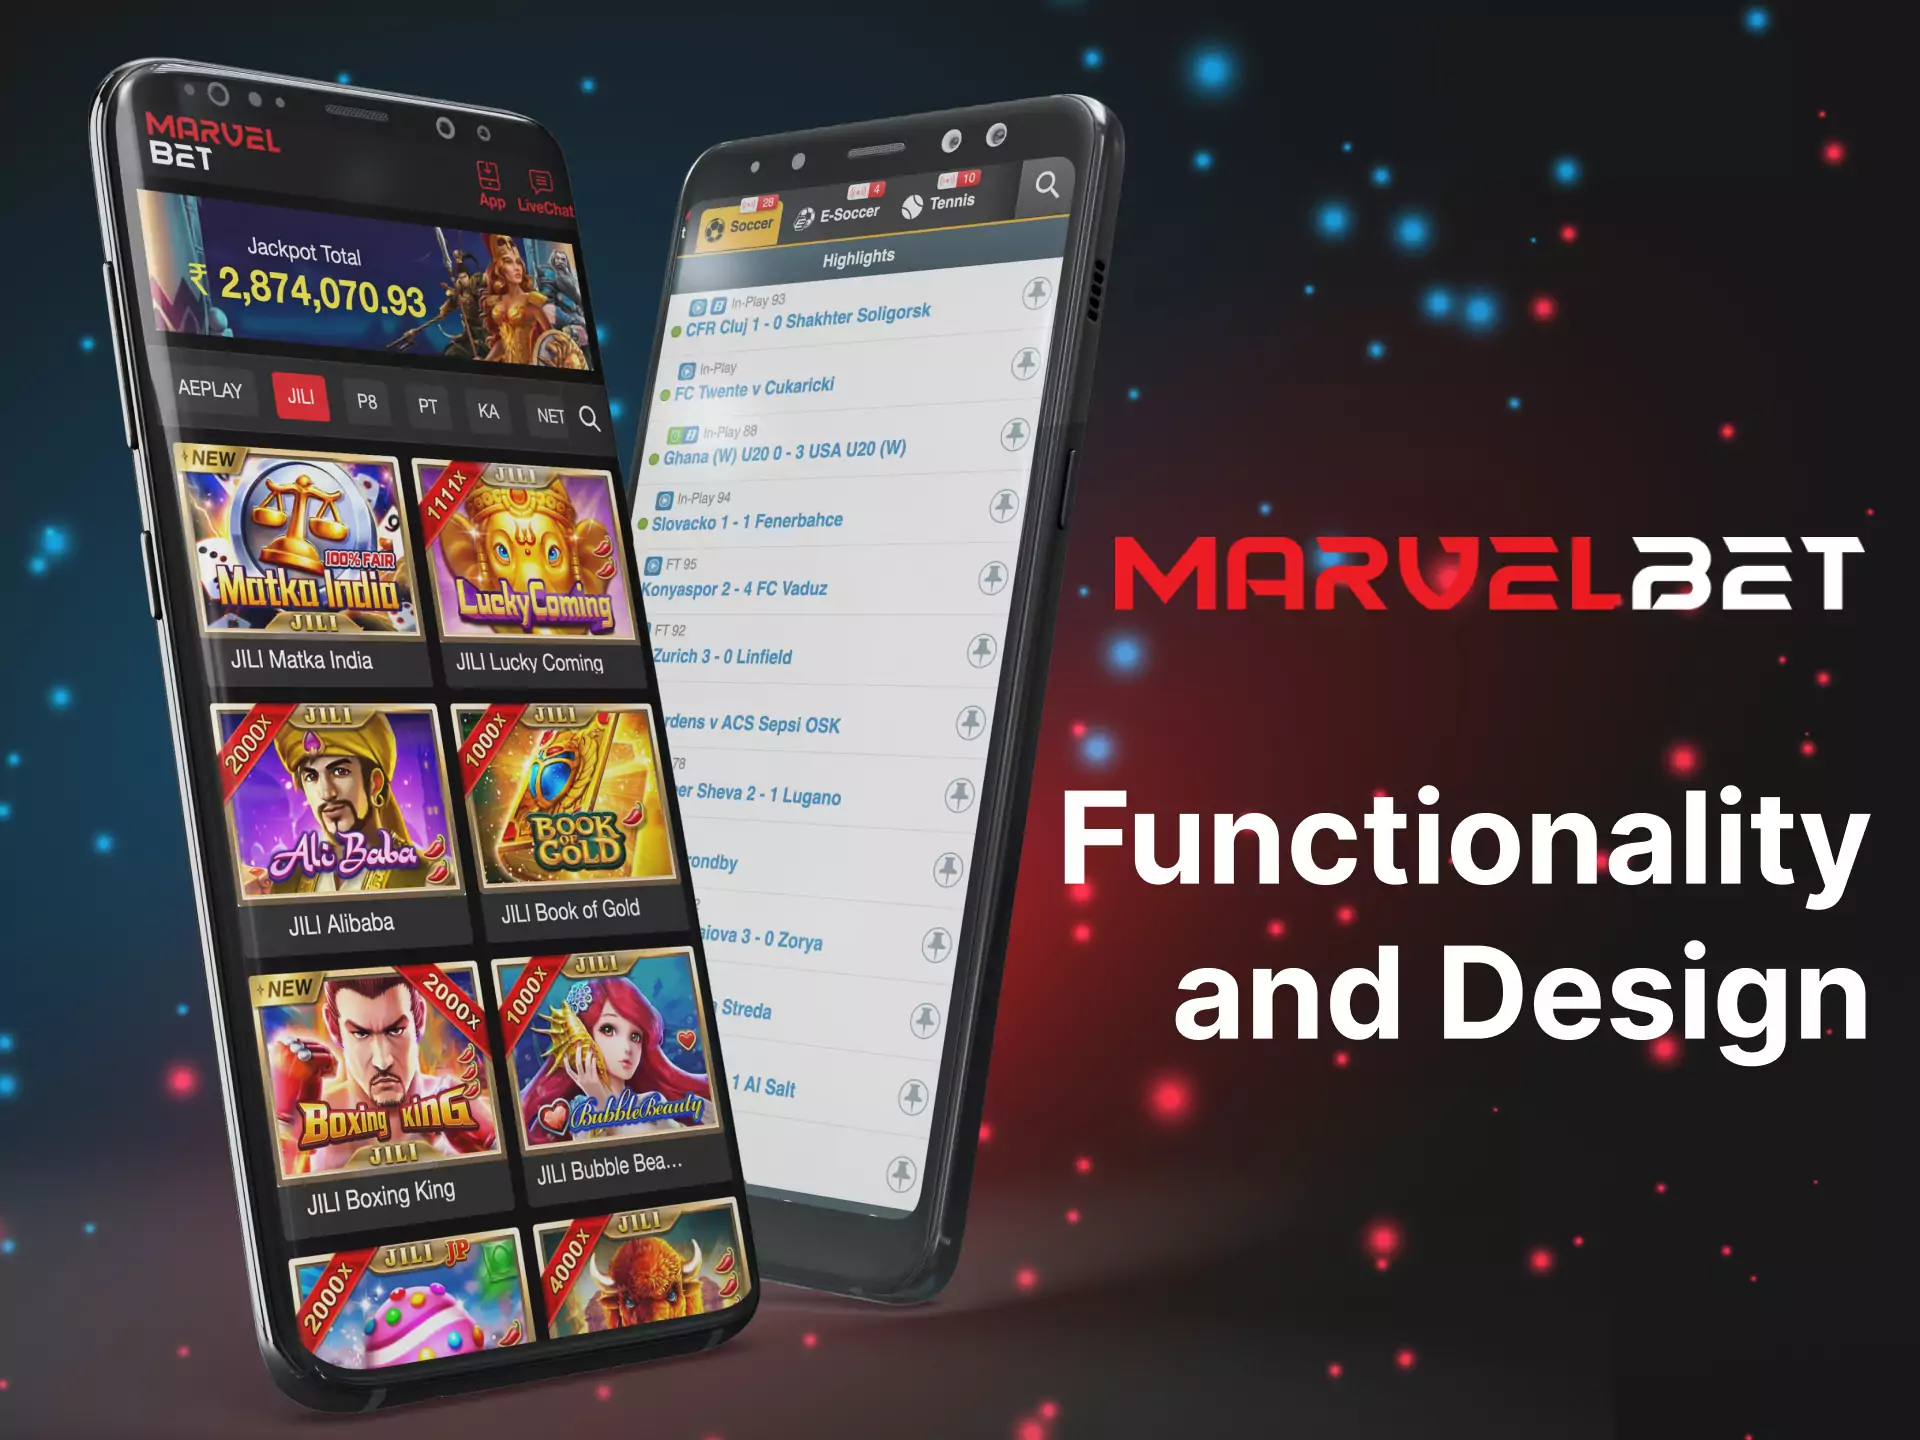 The MarvelBet app has an attractive and functional design.